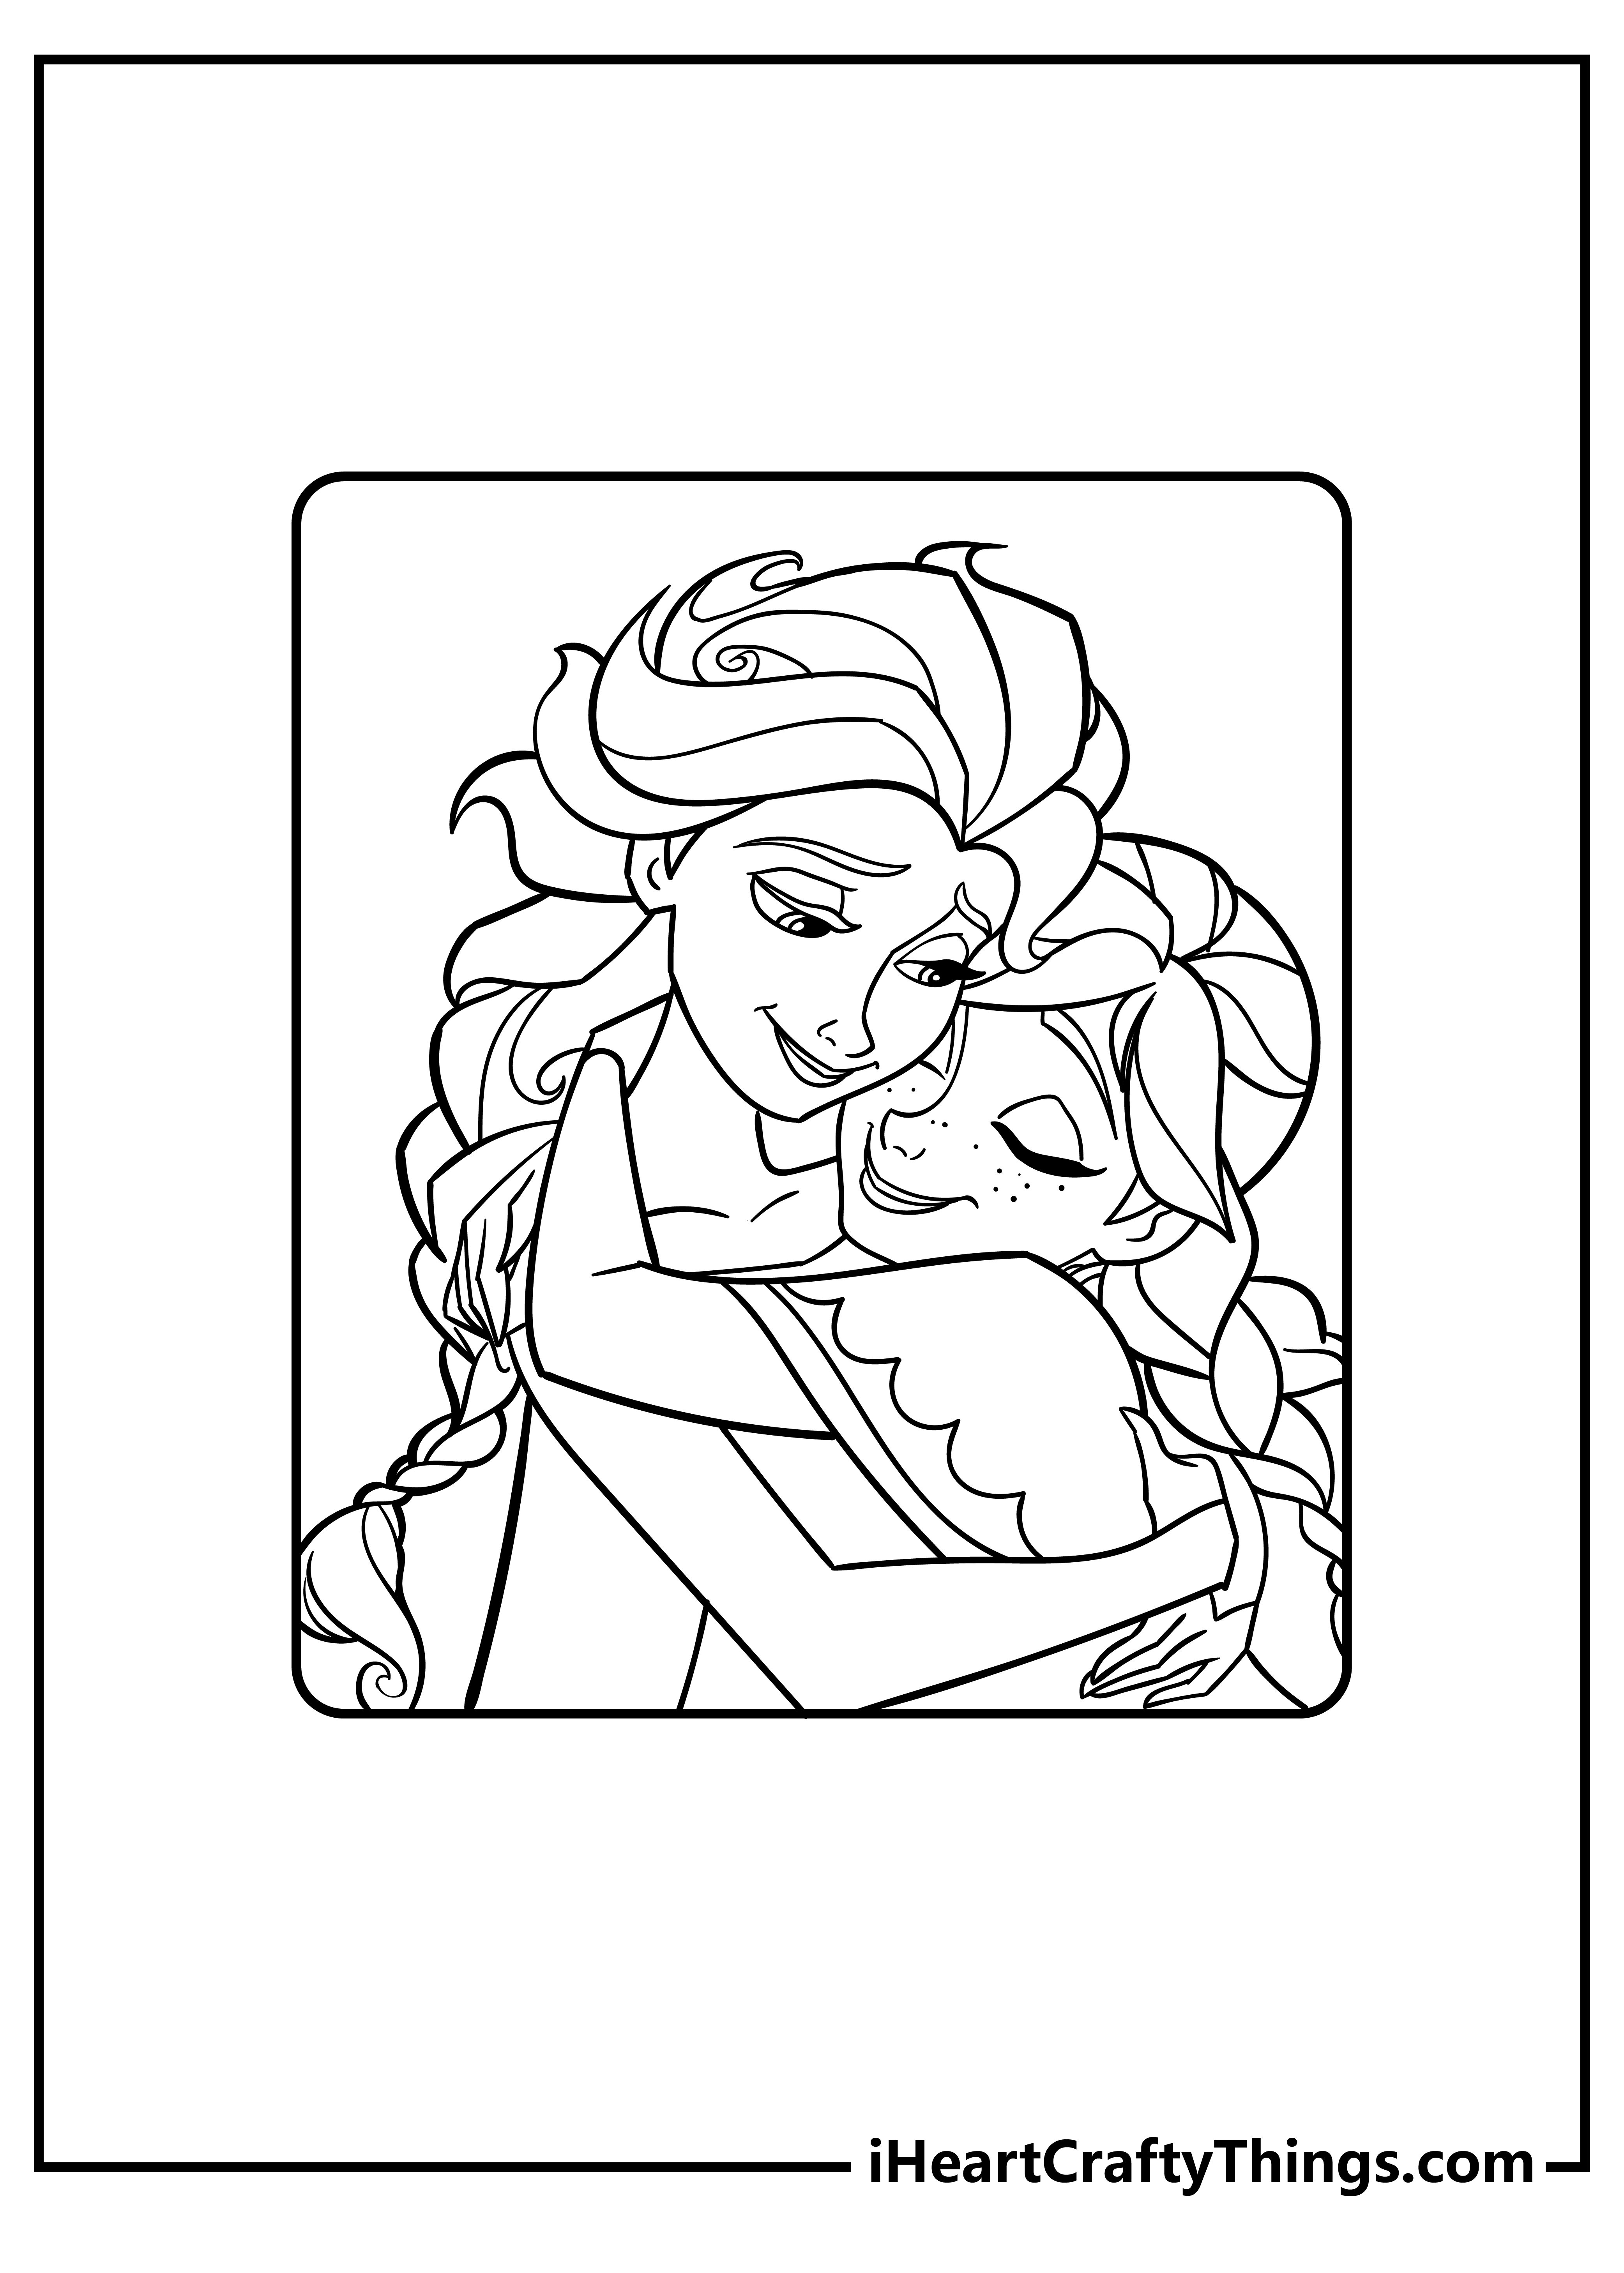 Elsa and Anna Coloring Book for kids free printable